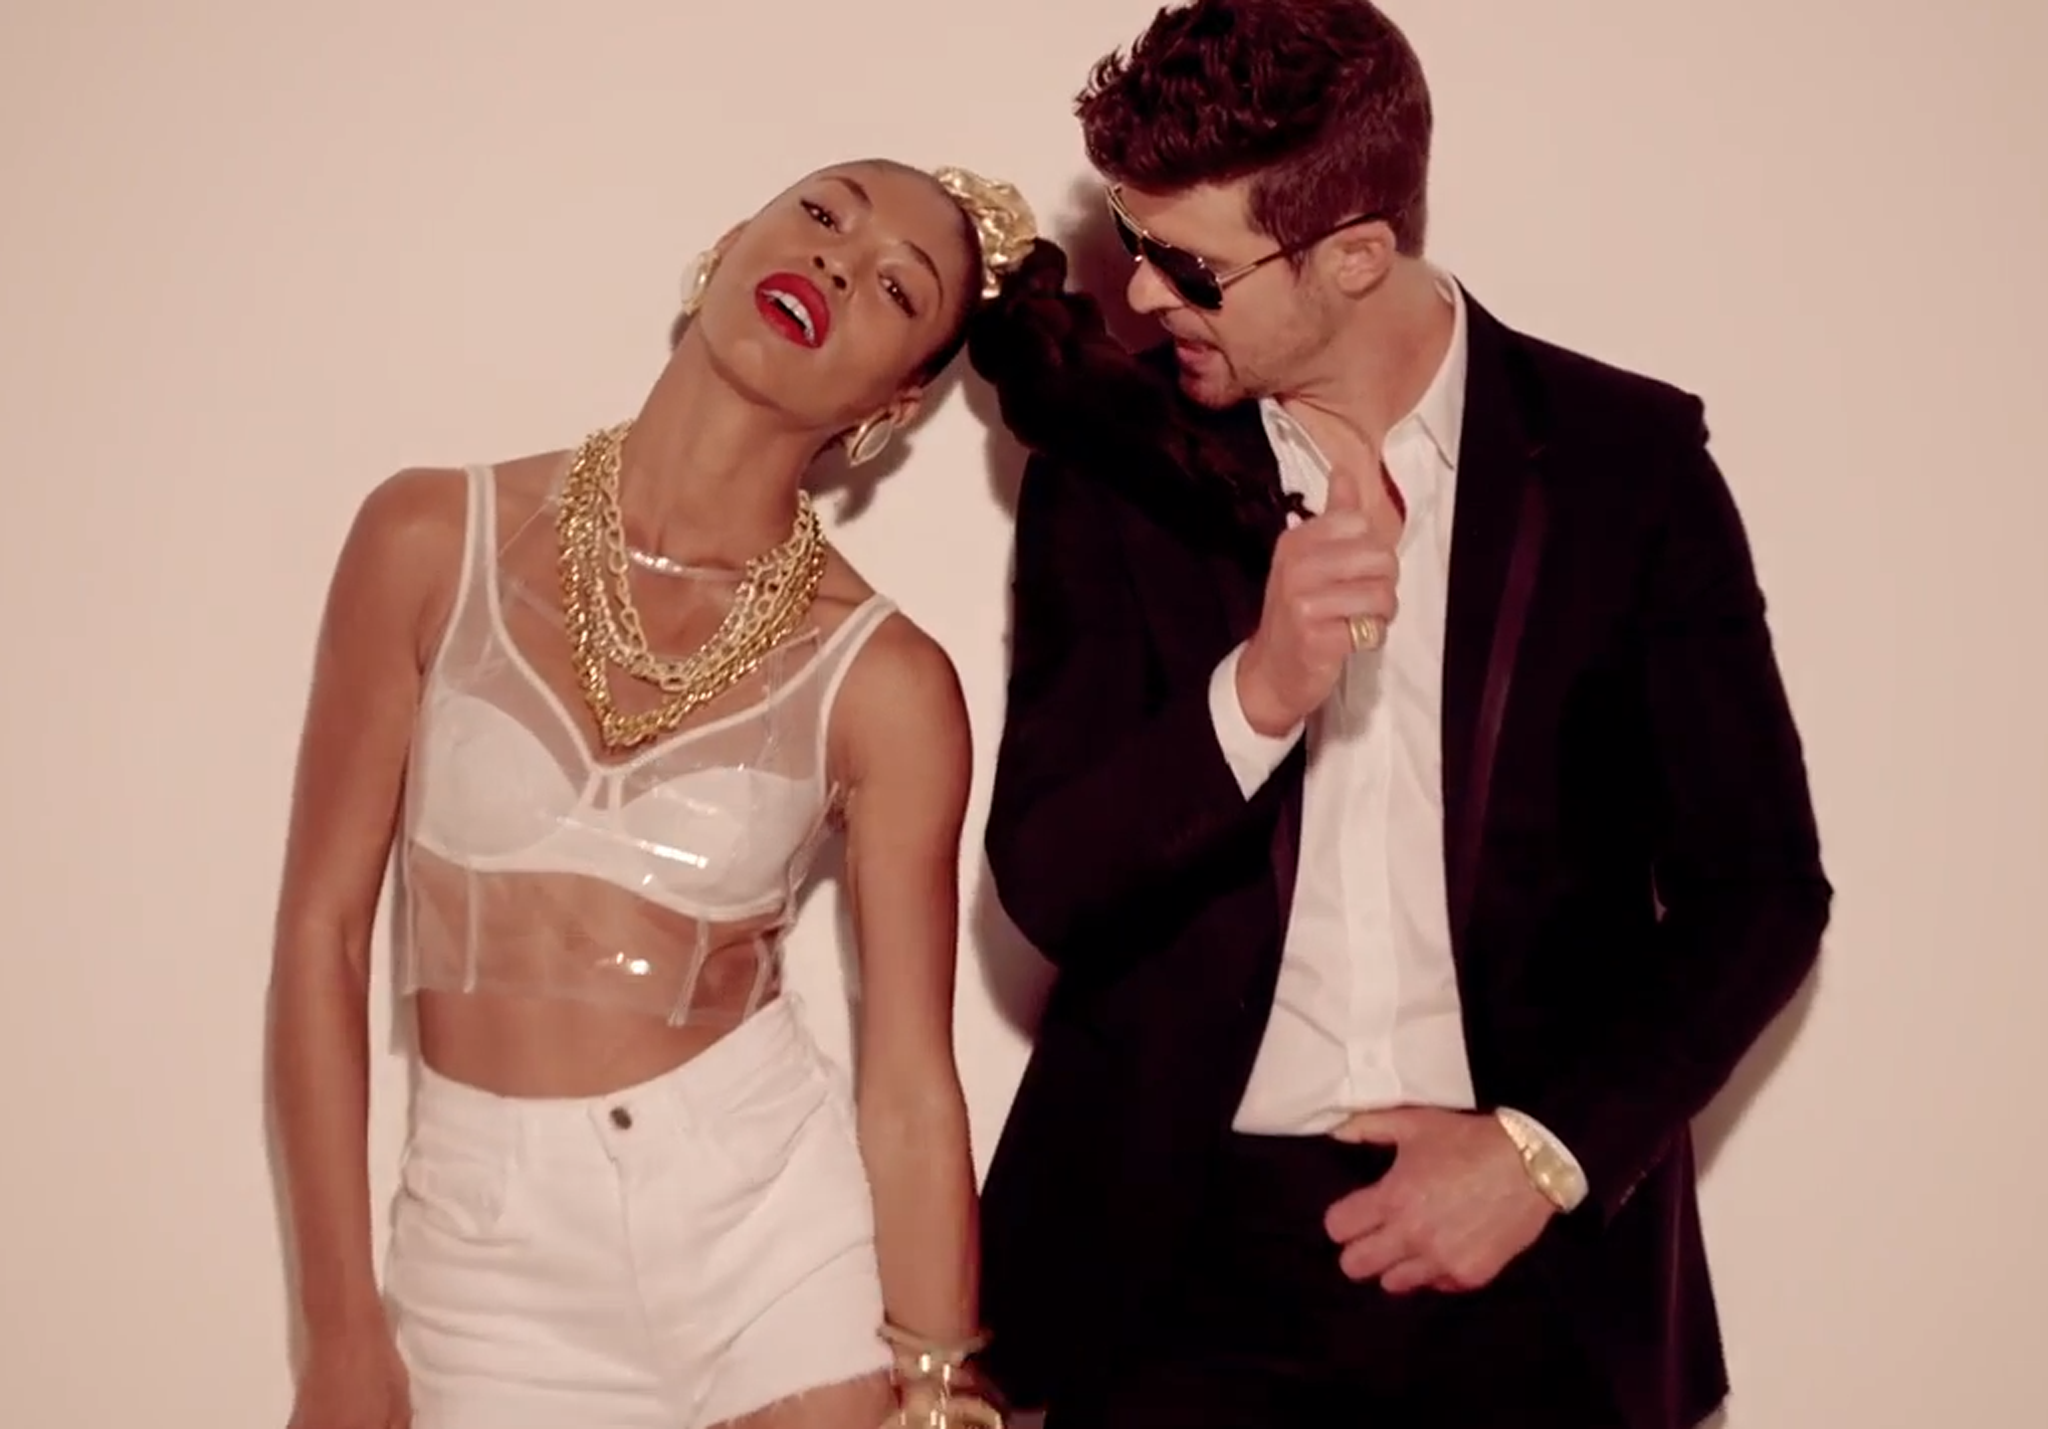 After Youtube ban, Robin Thicke rejects 'ridiculous' claim that